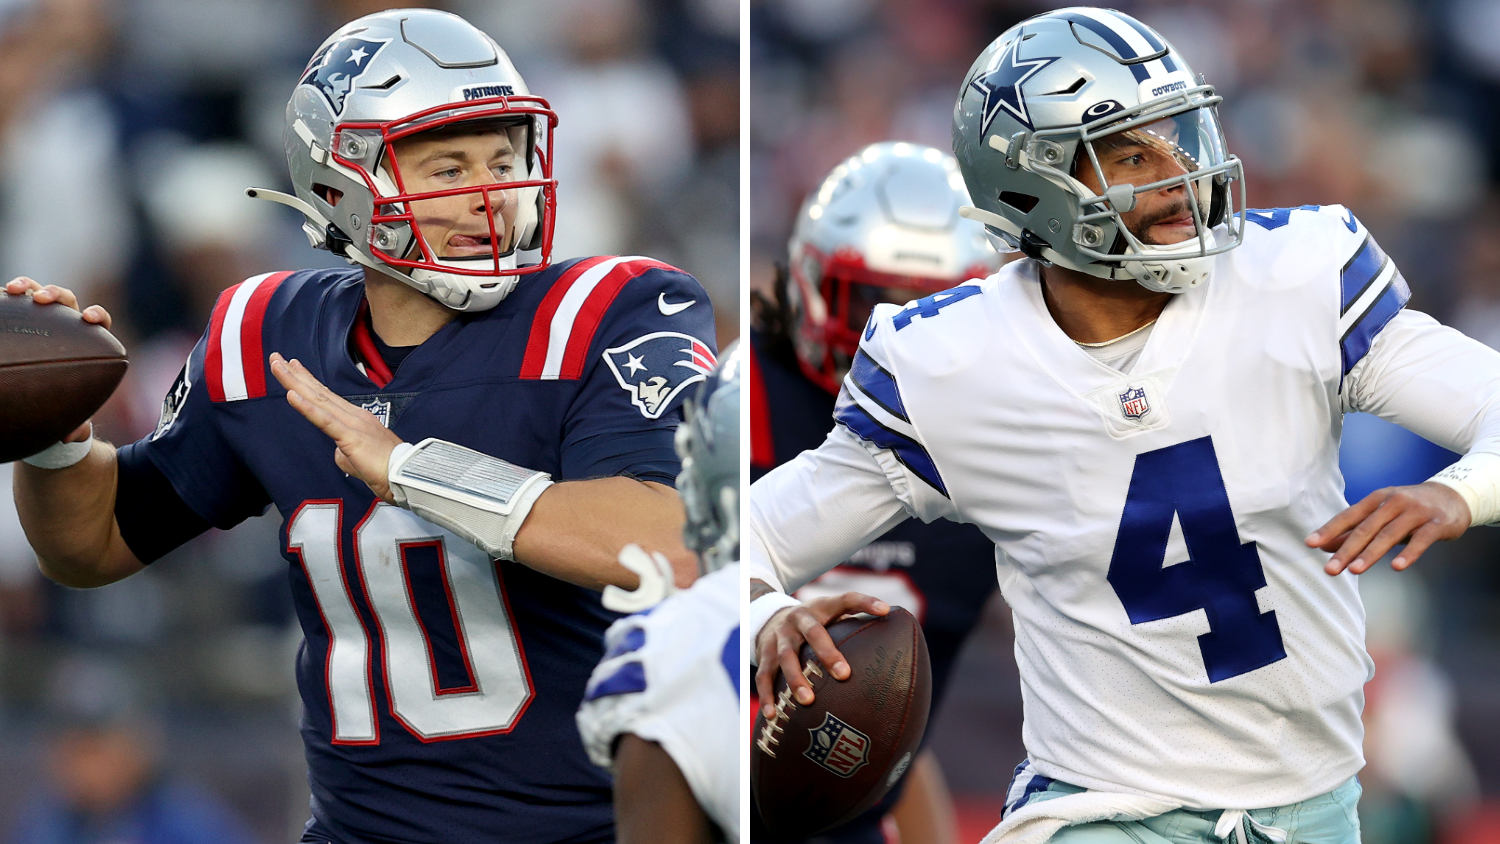 Patriots vs. Cowboys live stream: How to watch NFL Week 4 game on